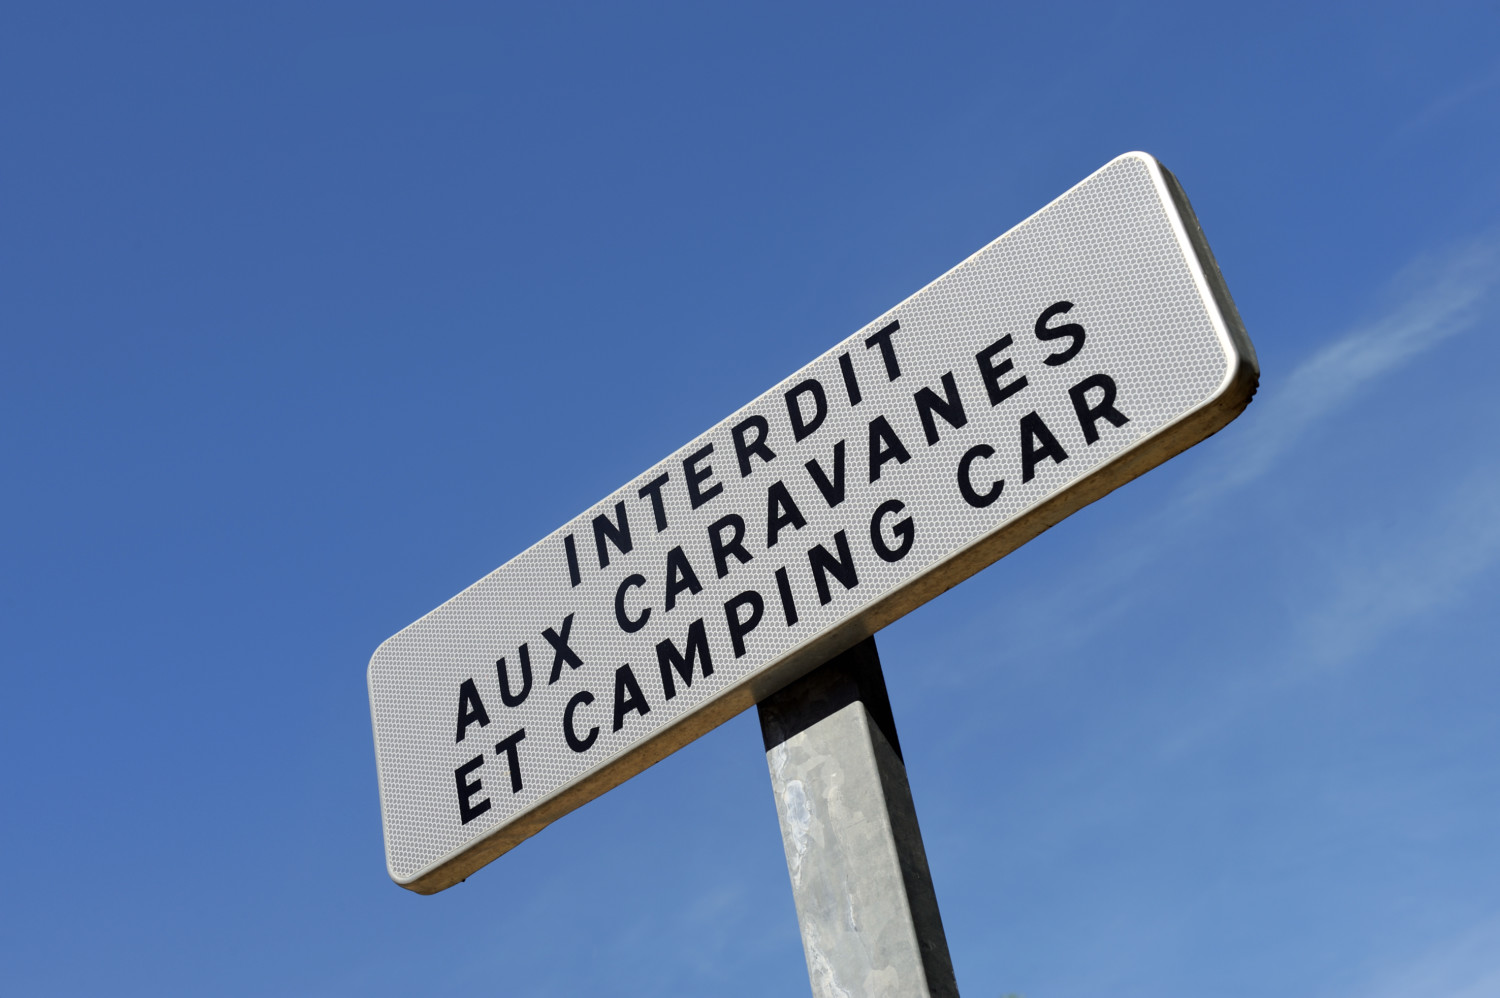 Sign in French language